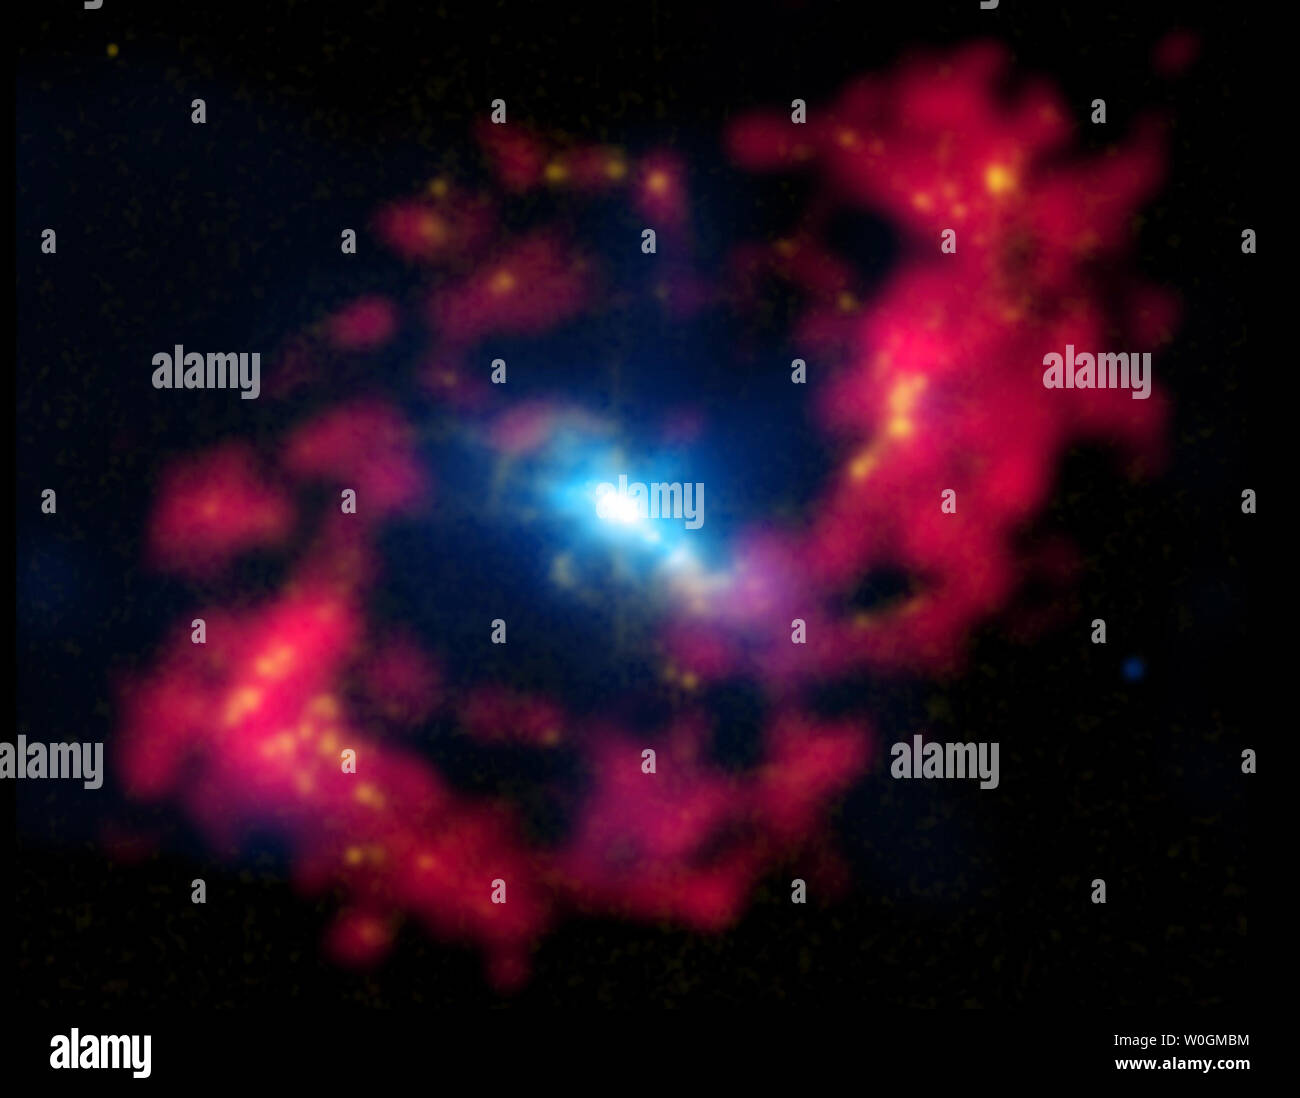 This undated NASA composite image shows the central region of the spiral galaxy NGC 4151. X-rays (blue) from the Chandra X-ray Observatory are combined with optical data (yellow) showing positively charged hydrogen (H II) from observations with the 1-meter Jacobus Kapteyn Telescope, December 31, 2011. UPI/NASA Stock Photo